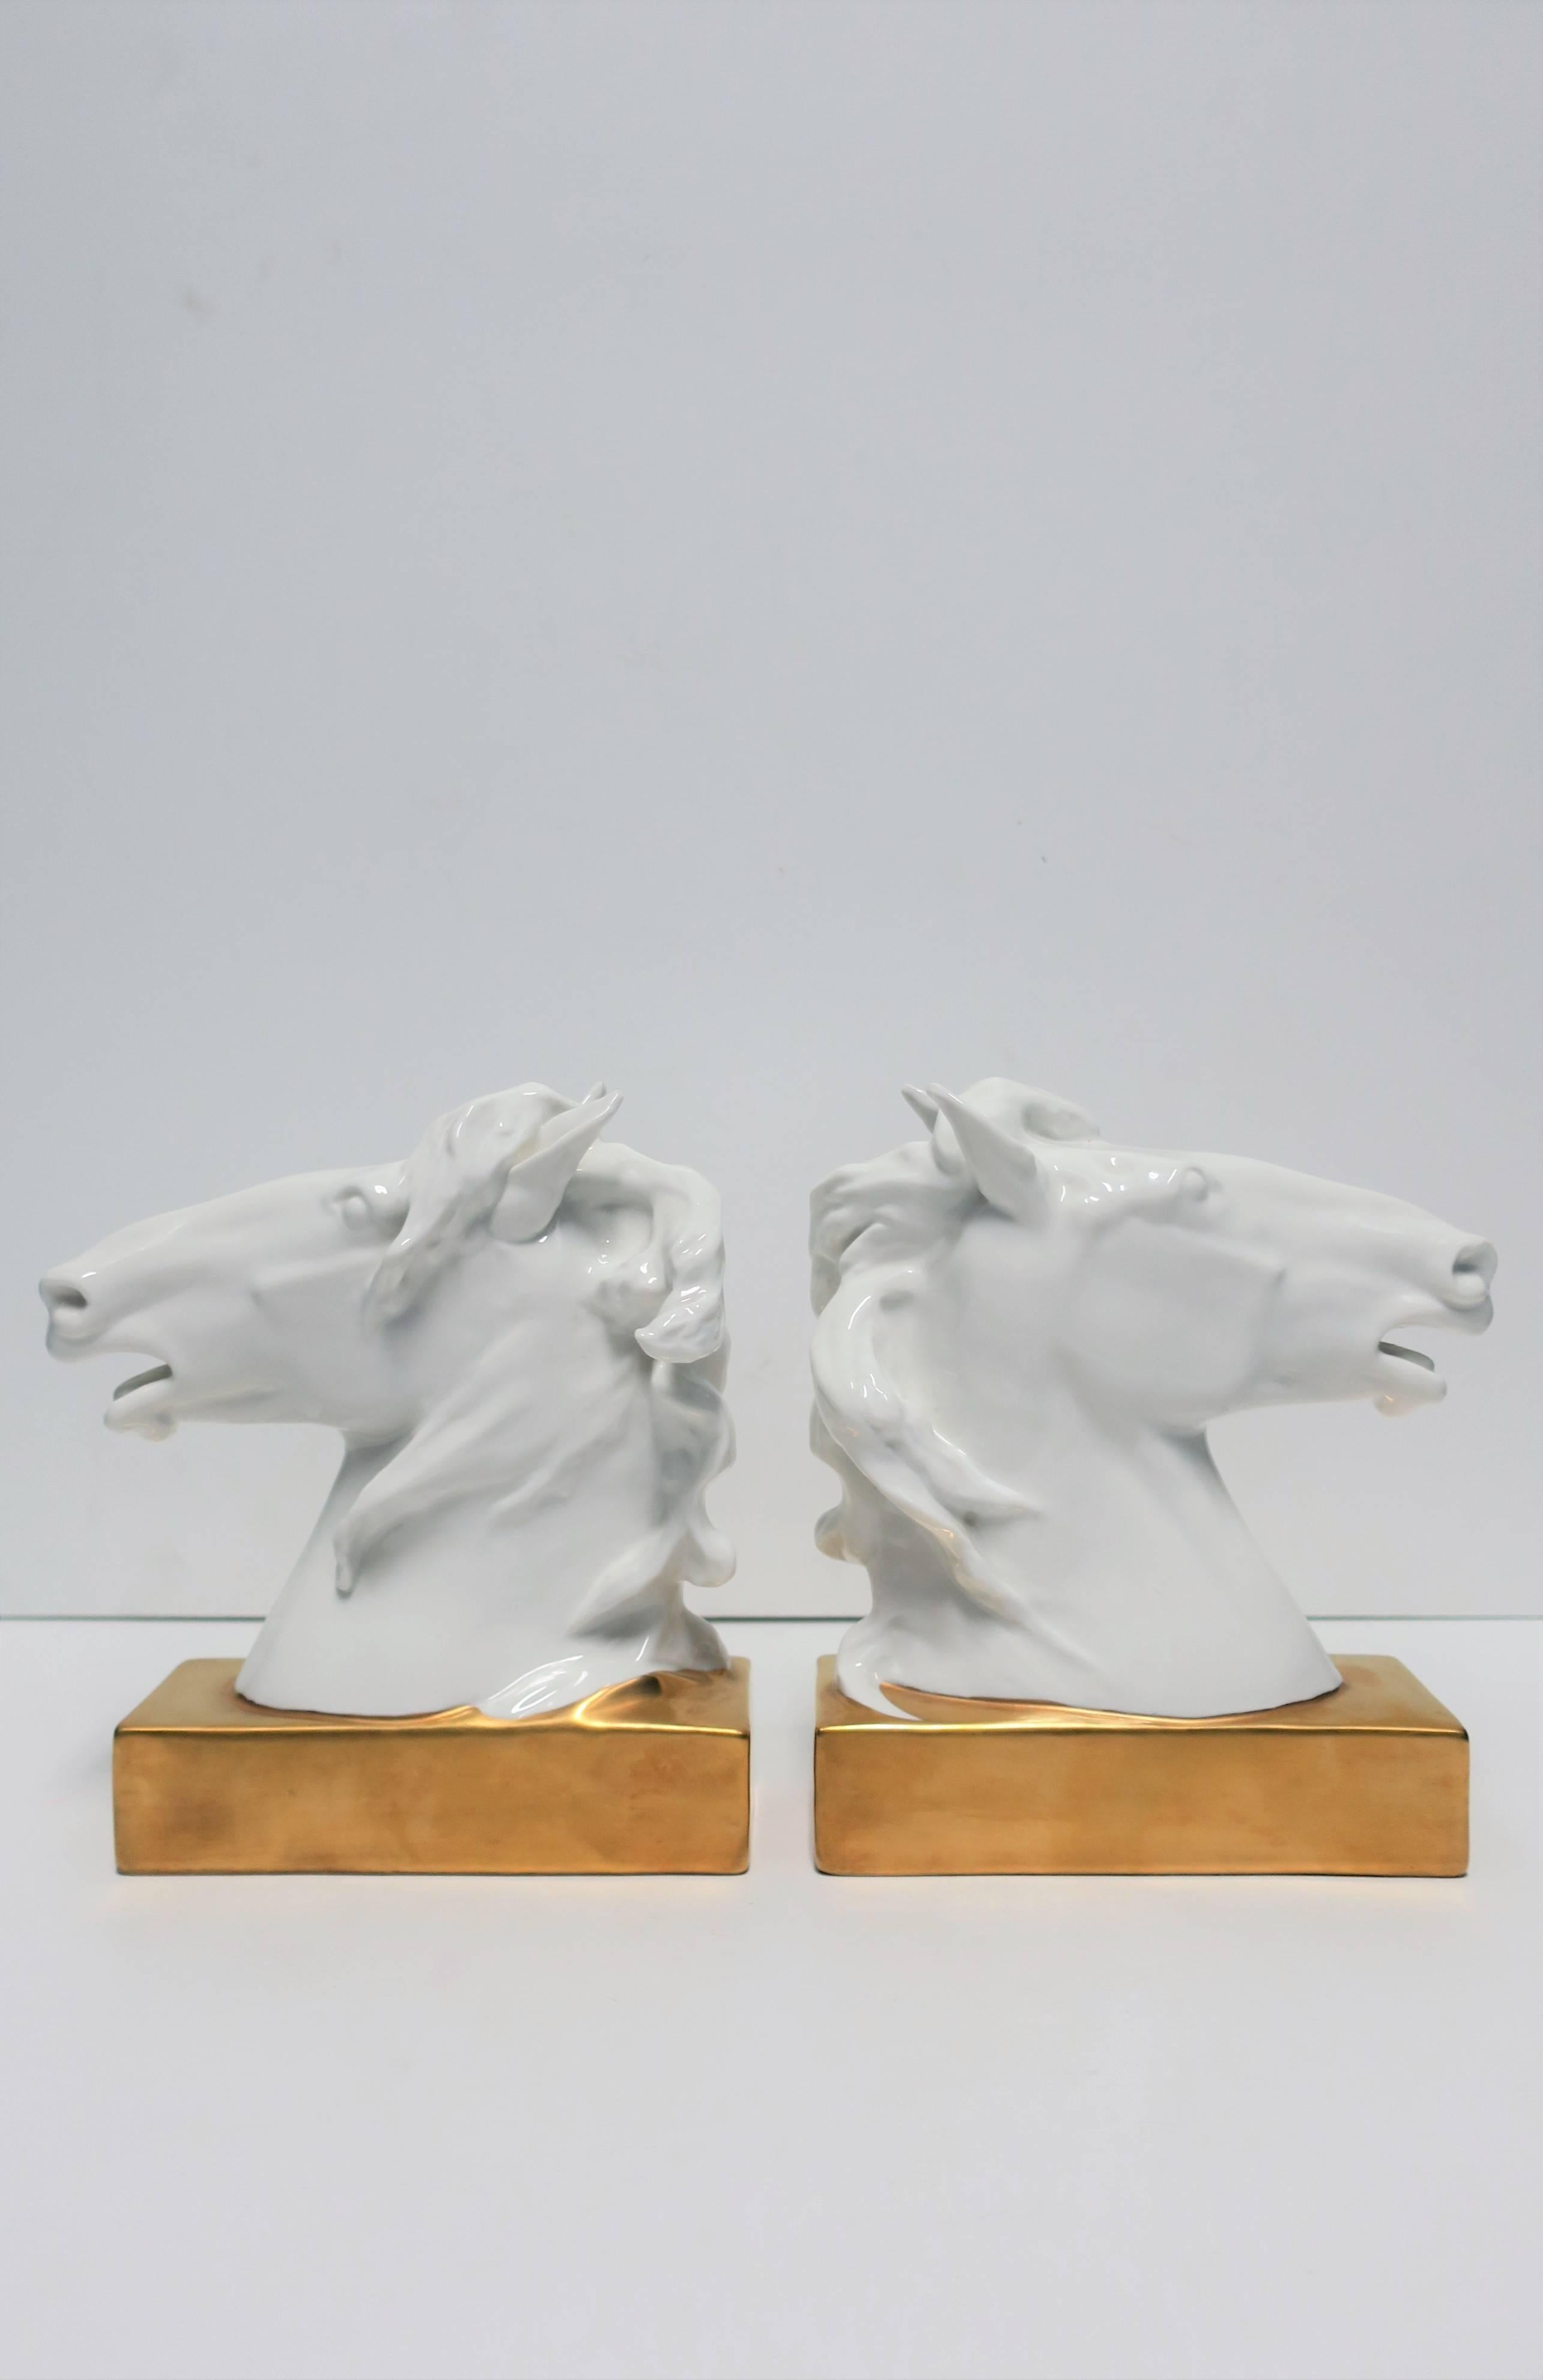 A beautiful and fine pair of white and gold porcelain horse or equine bookends or decorative objects/sculptures, circa late-20th century, Portugal. Pieces have beautiful detail in mane, snout, and ears, finished with a rectangular gold base. A great